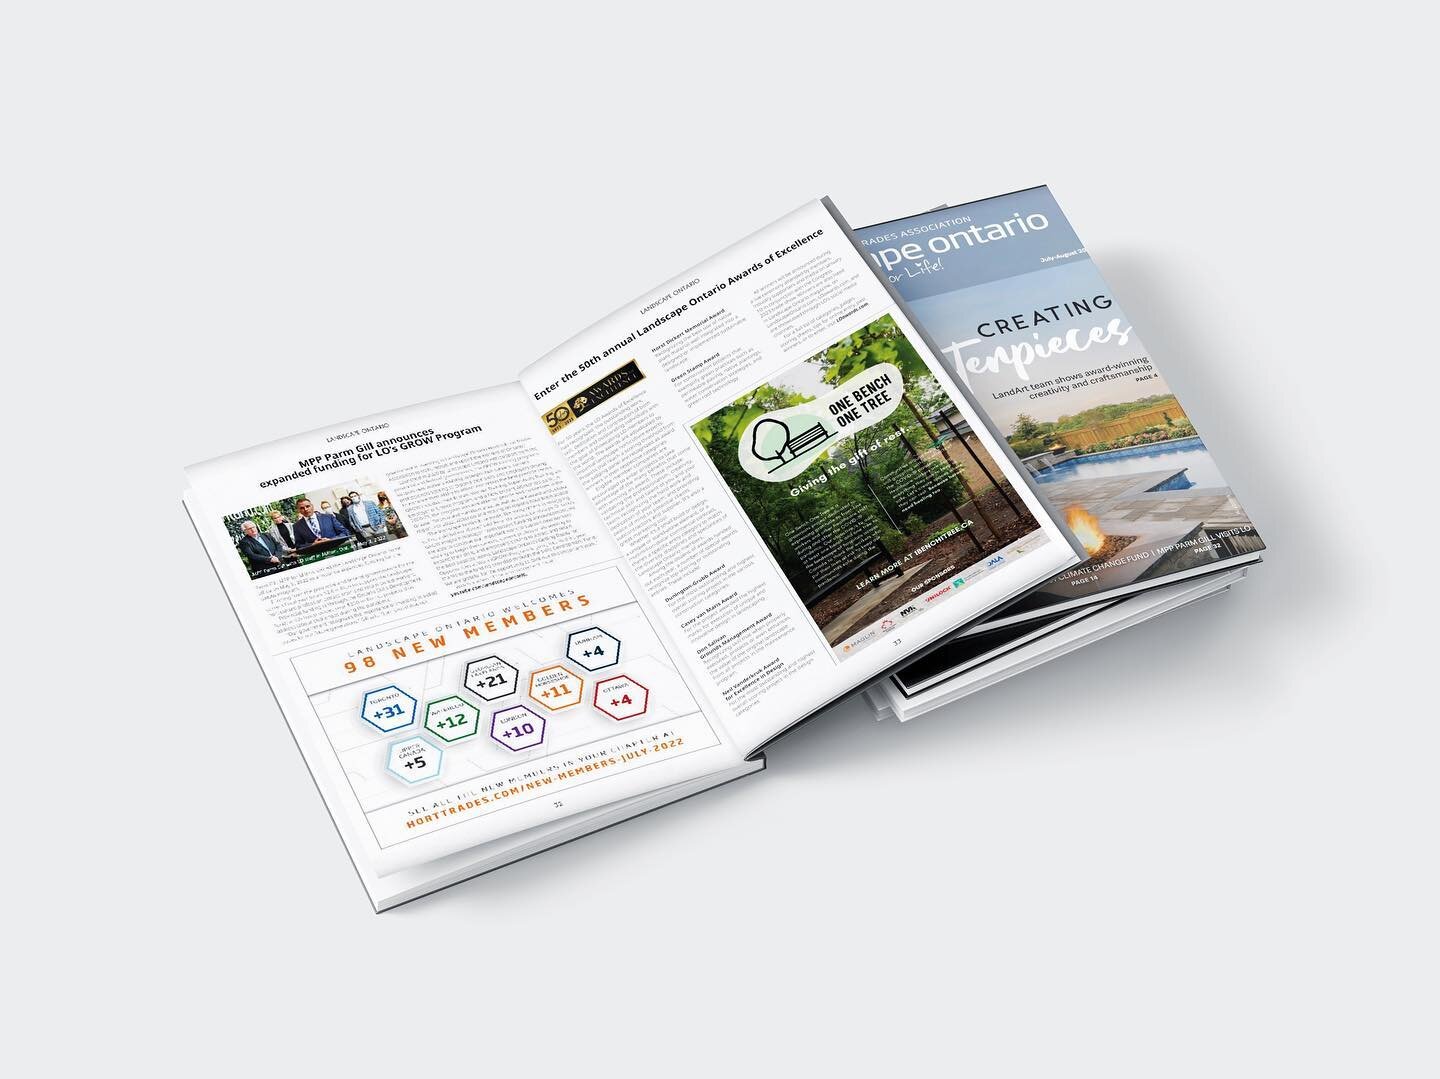 Check us out!

Thank you to Landscape Ontario for featuring One Bench One Tree in your latest magazine and spreading our mission further! To check out the full magazine, visit: https://horttrades.com/landscape-ontario-july-2022

Please consider givin